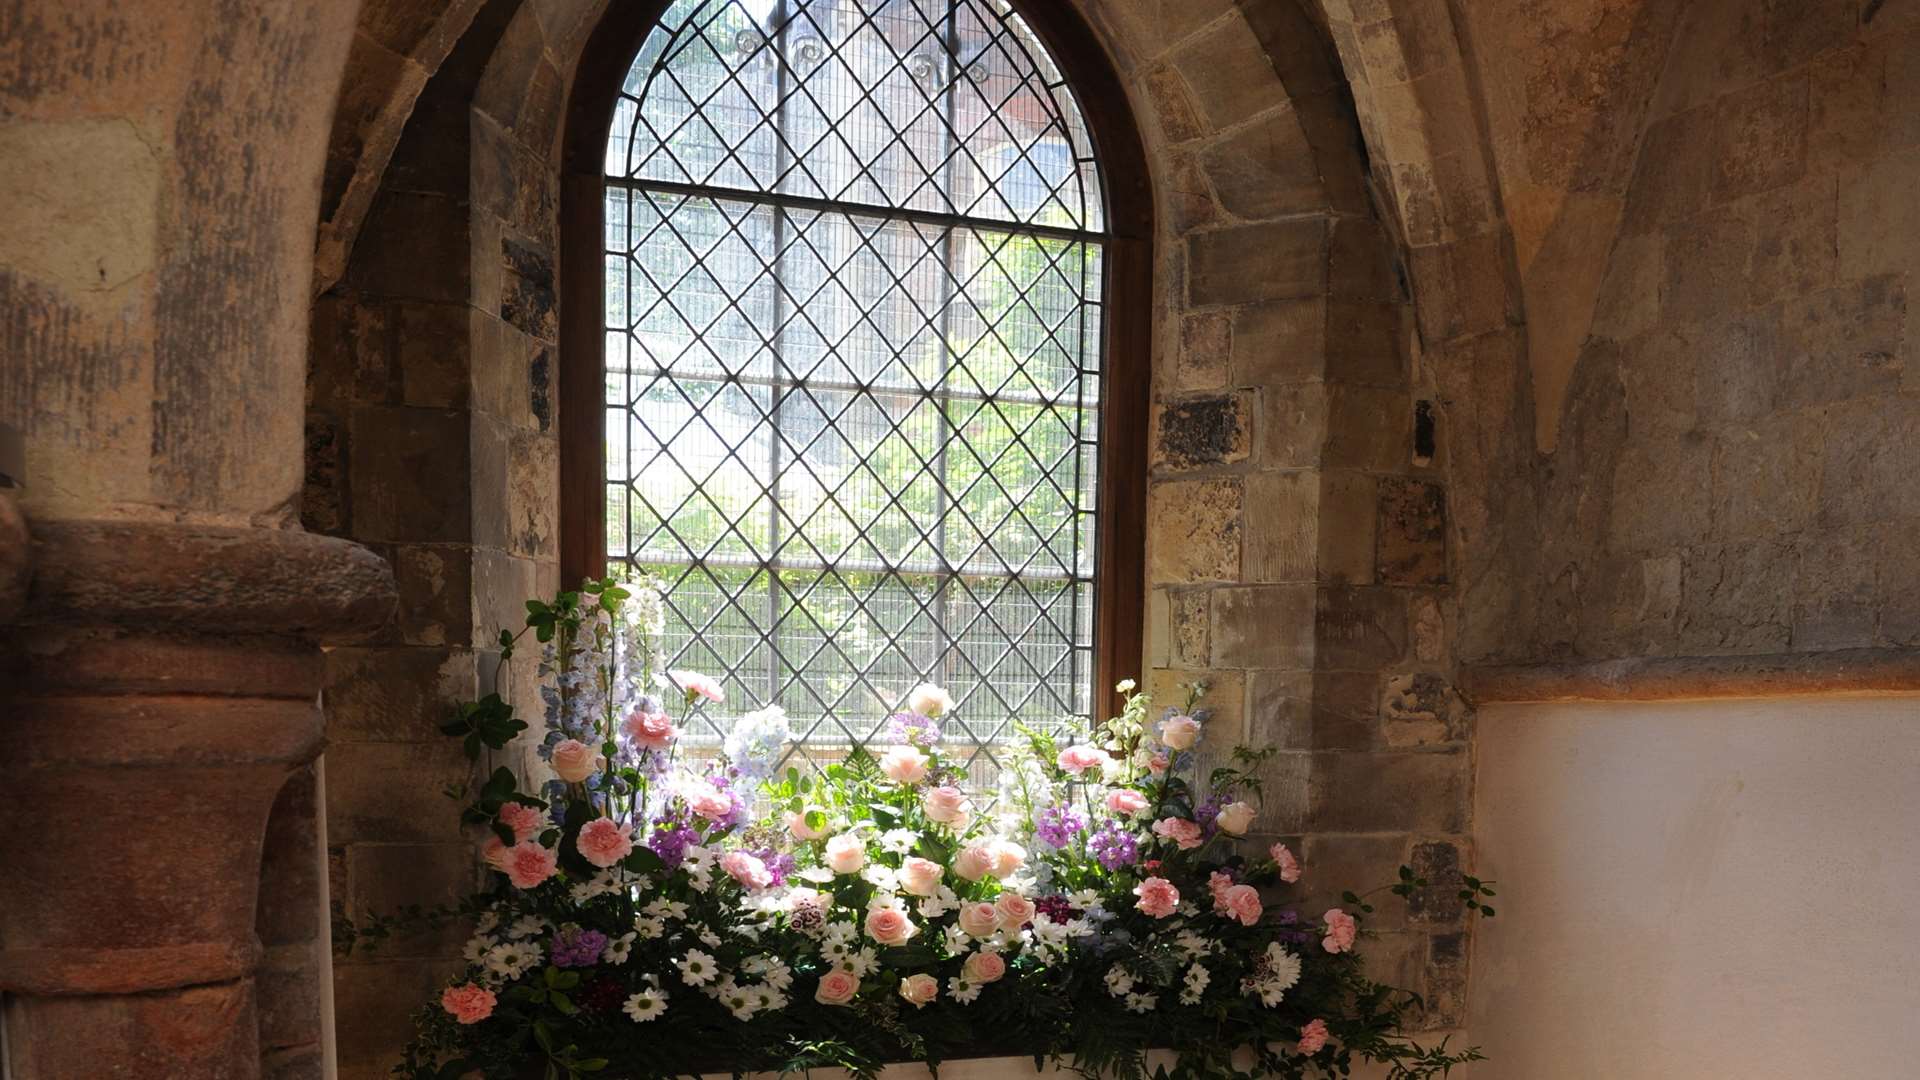 The floral arrangements can be seen in Rochester Cathedral’s Crypt